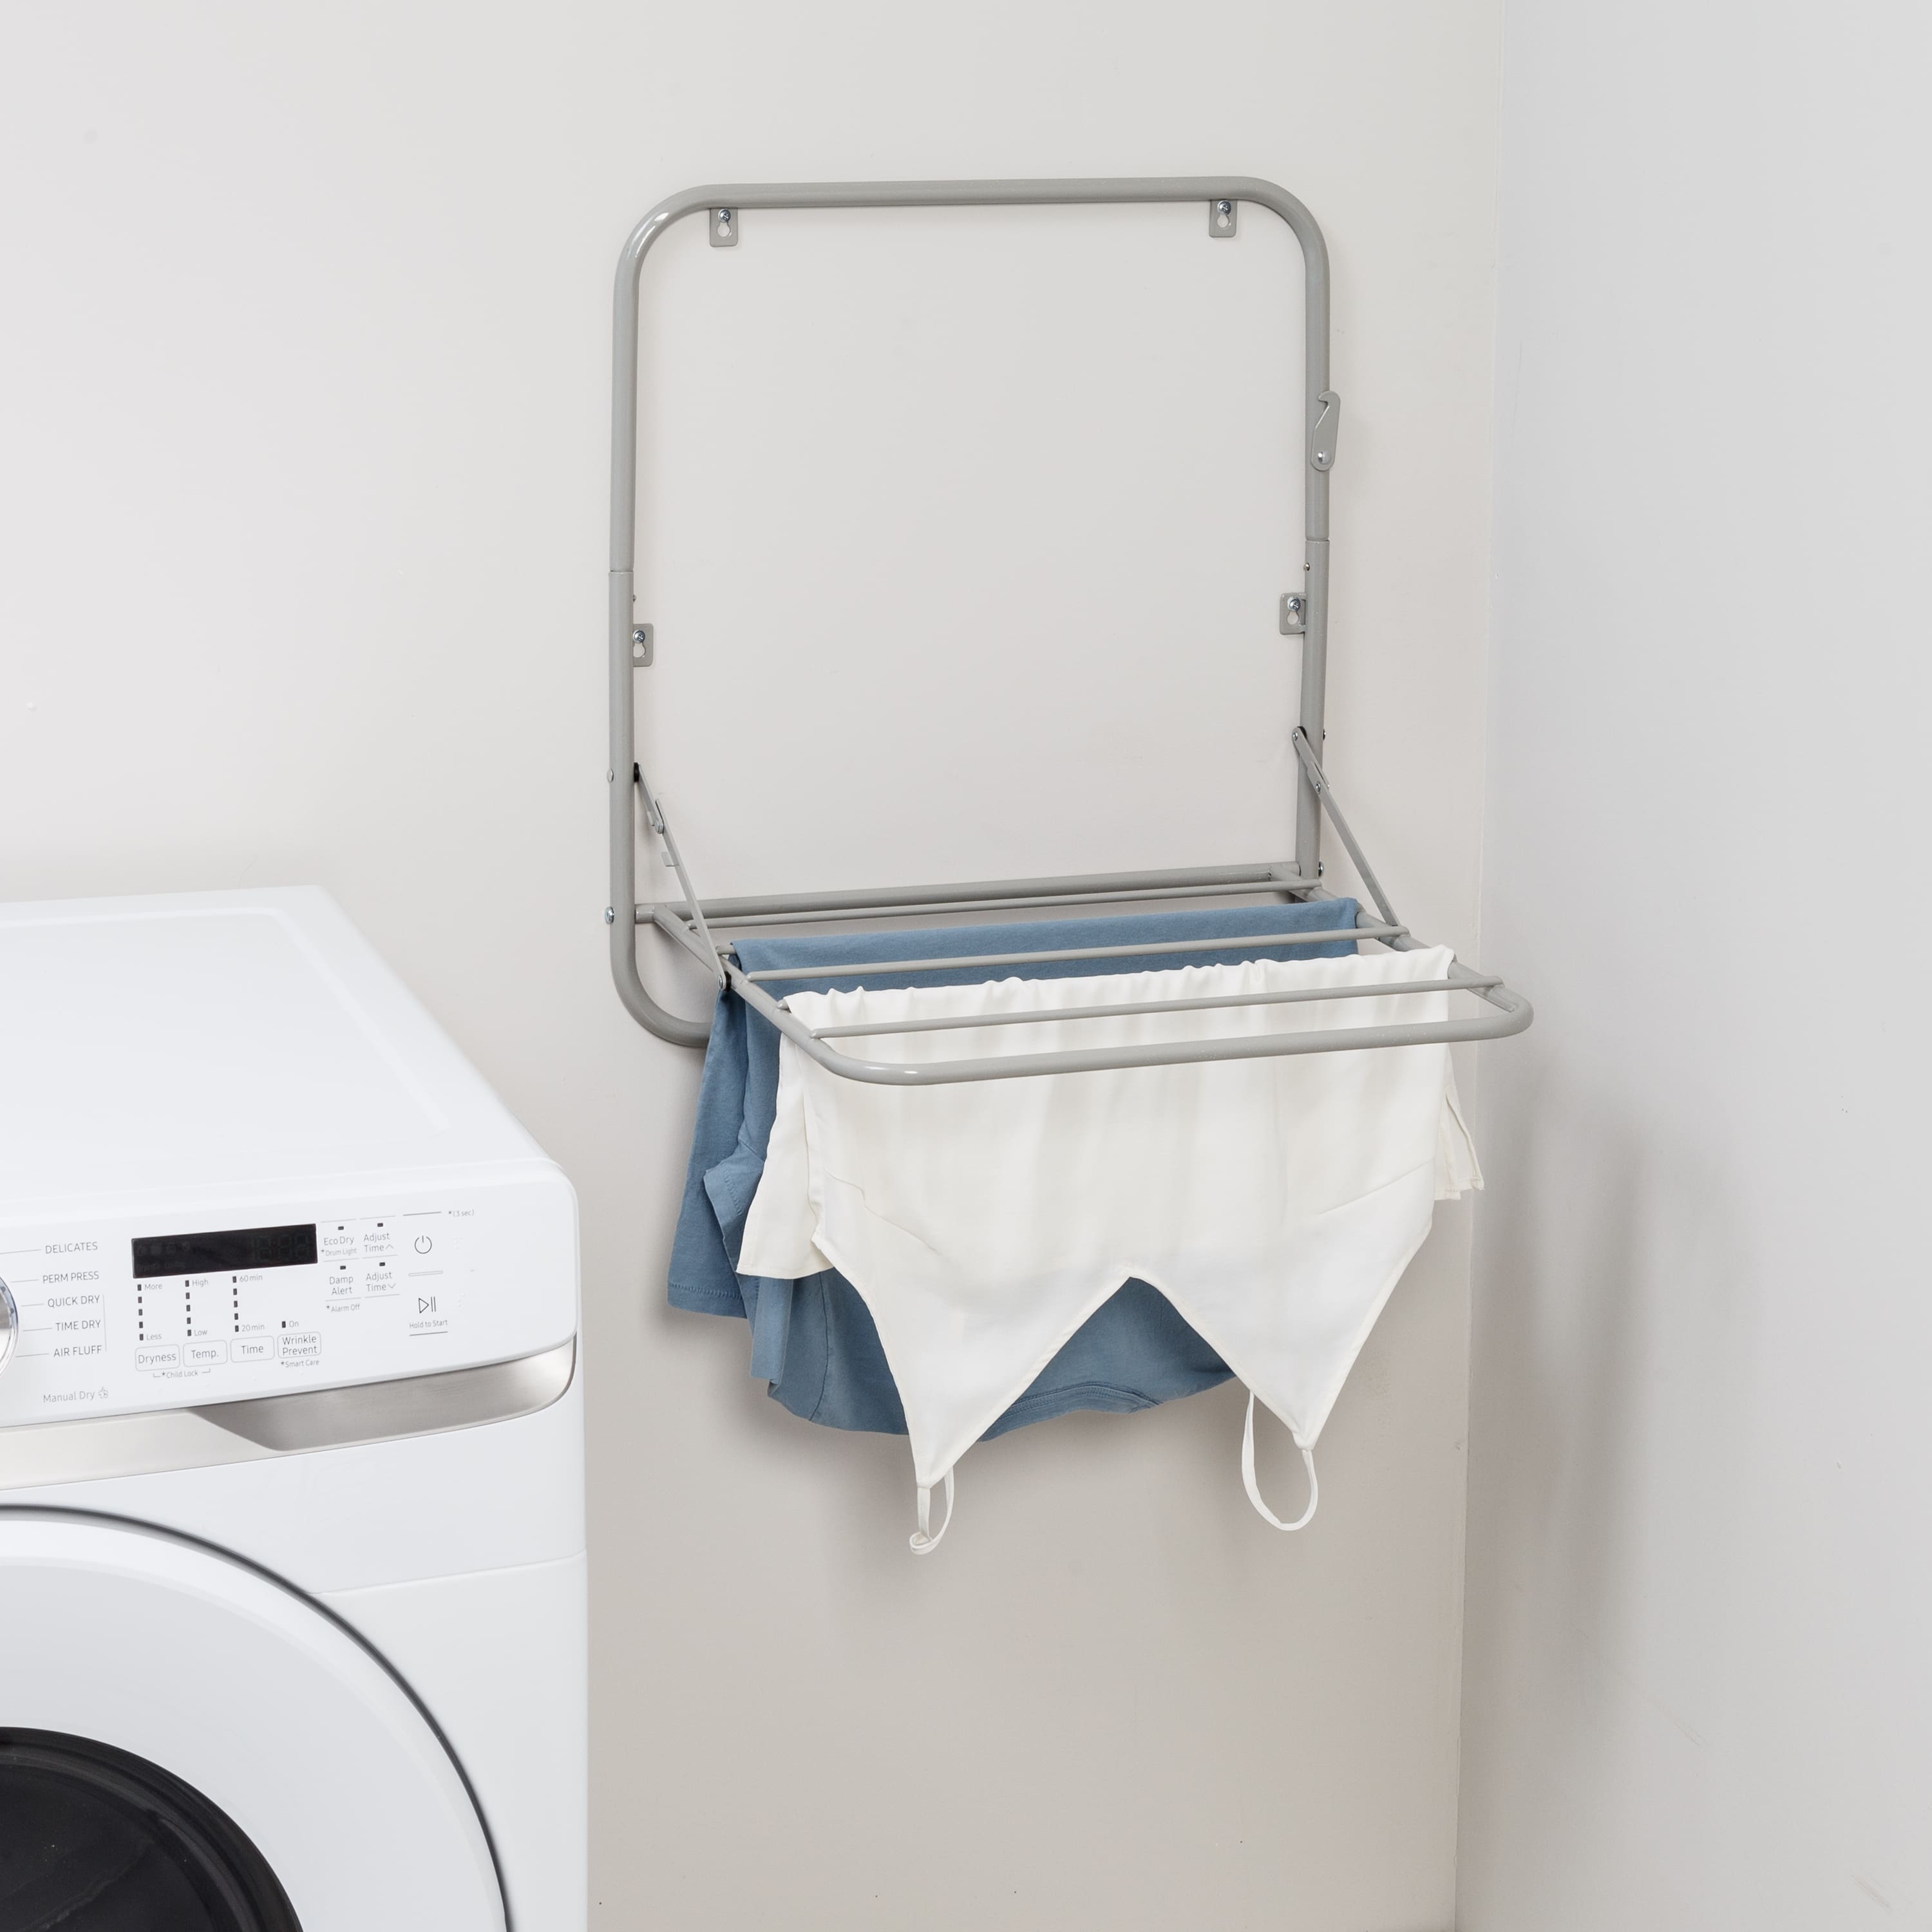 Honey Can Do Gray Collapsible Wall-Mounted Clothes Drying Rack